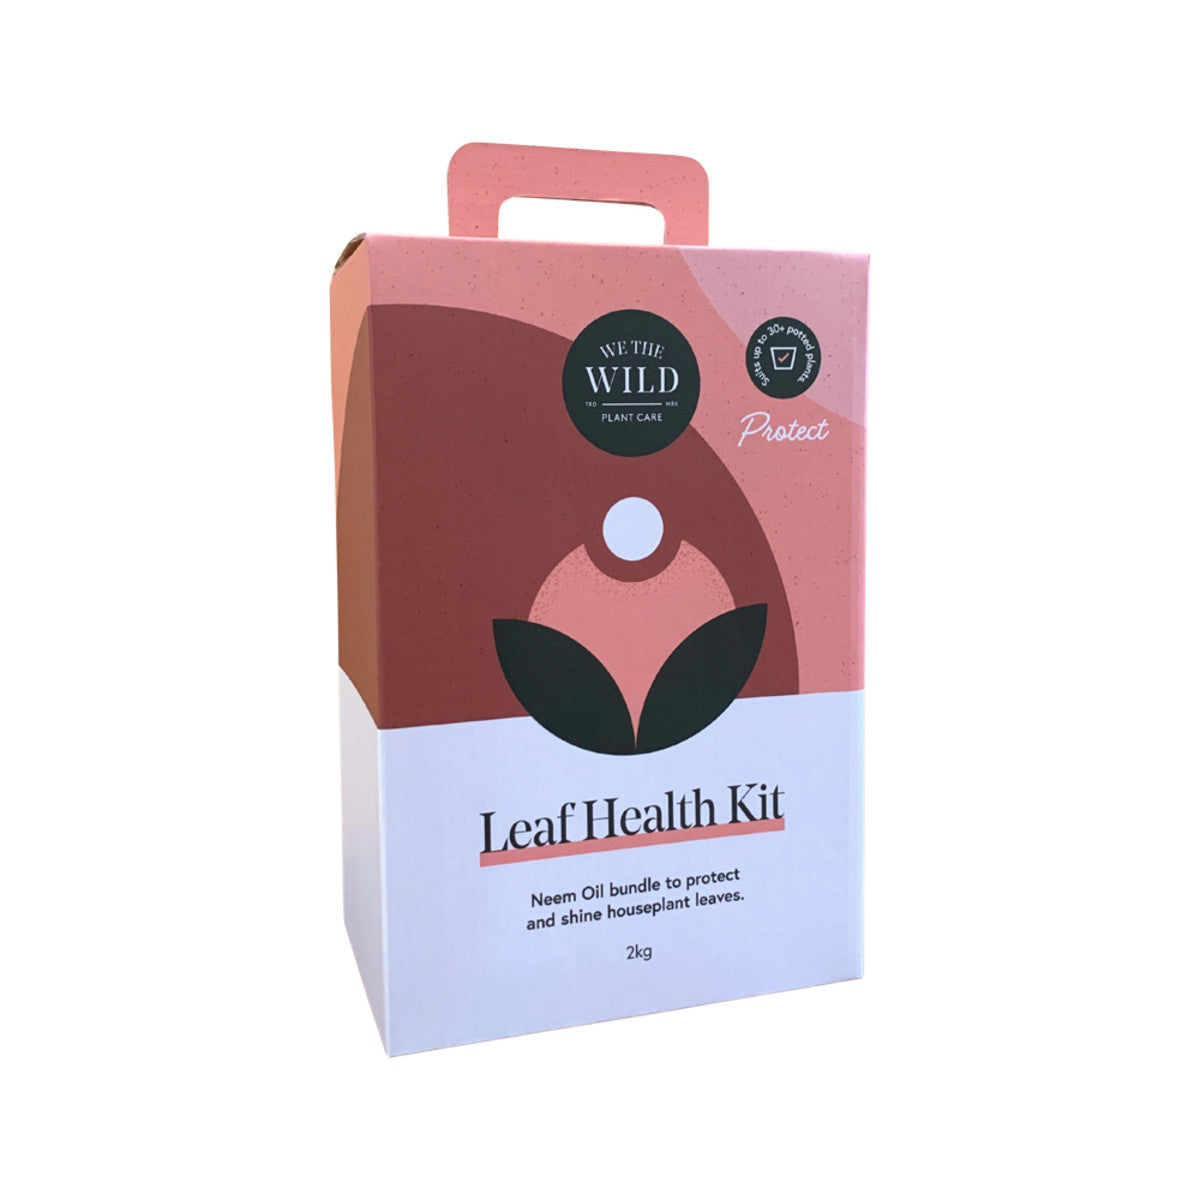 We The Wild Organic Leaf Health Kit 2kg Pack, Shines & Protects Your Houseplant Leaves